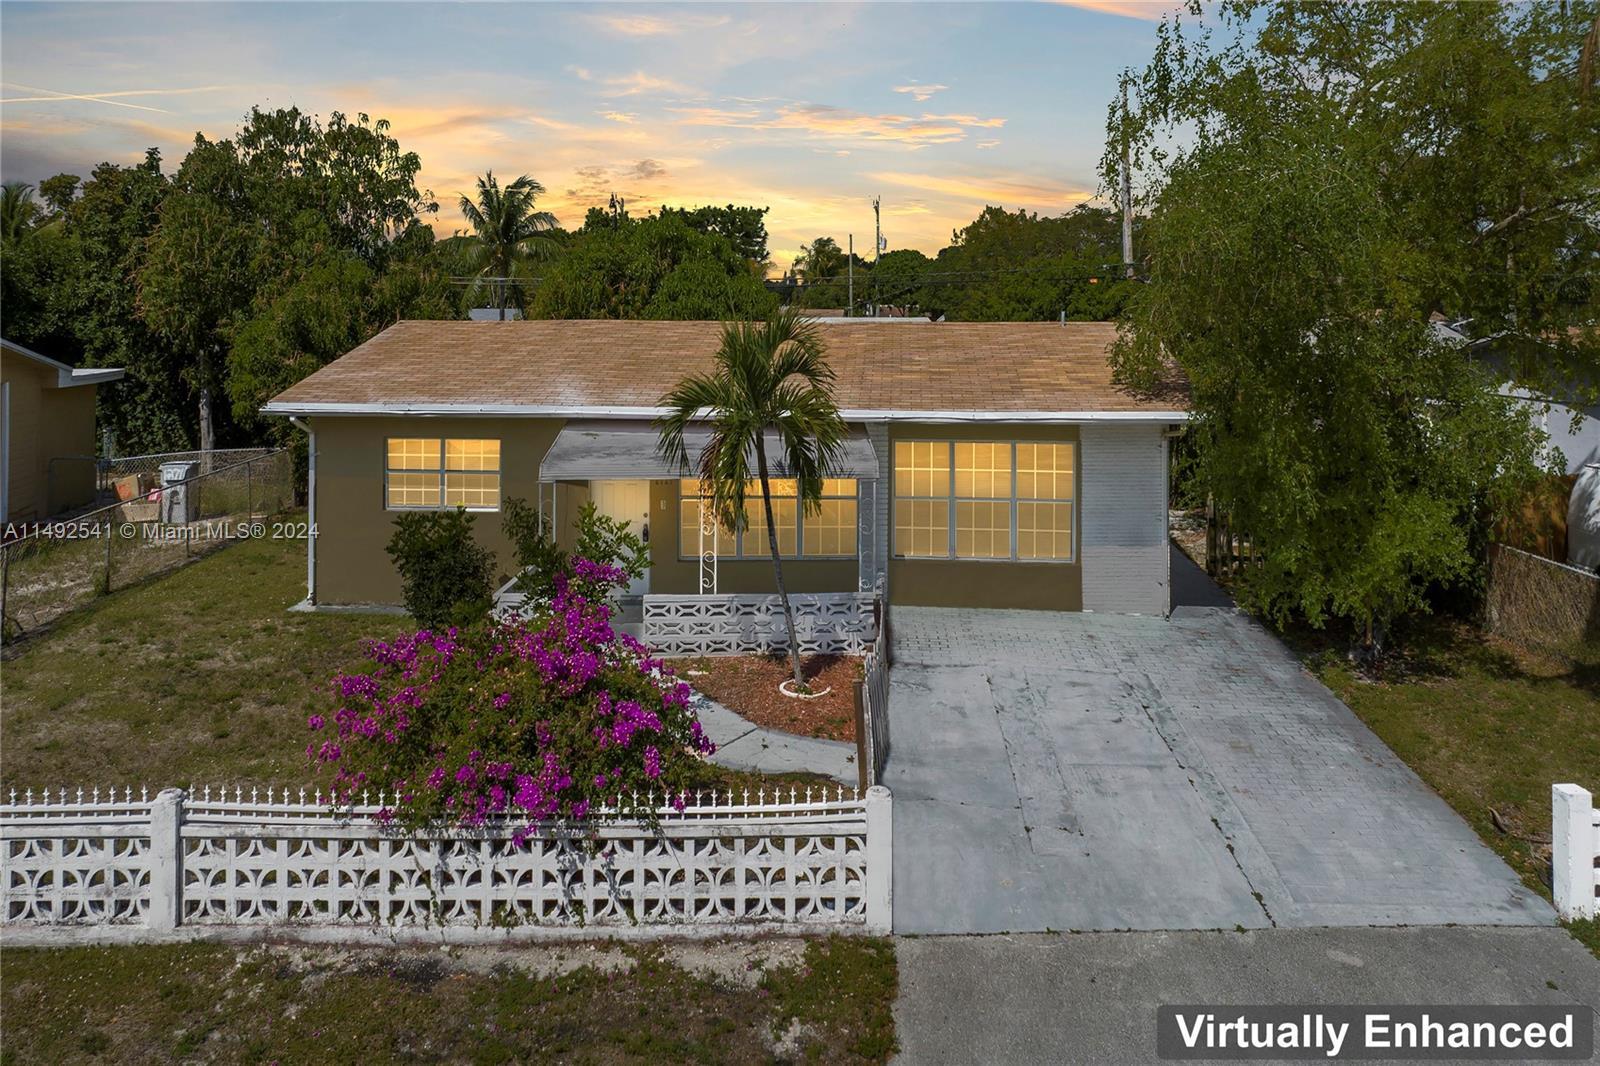 Priced to sell! Updated 3 bed / 2 bath home in Pompano's Cresthaven. Property features updated kitch